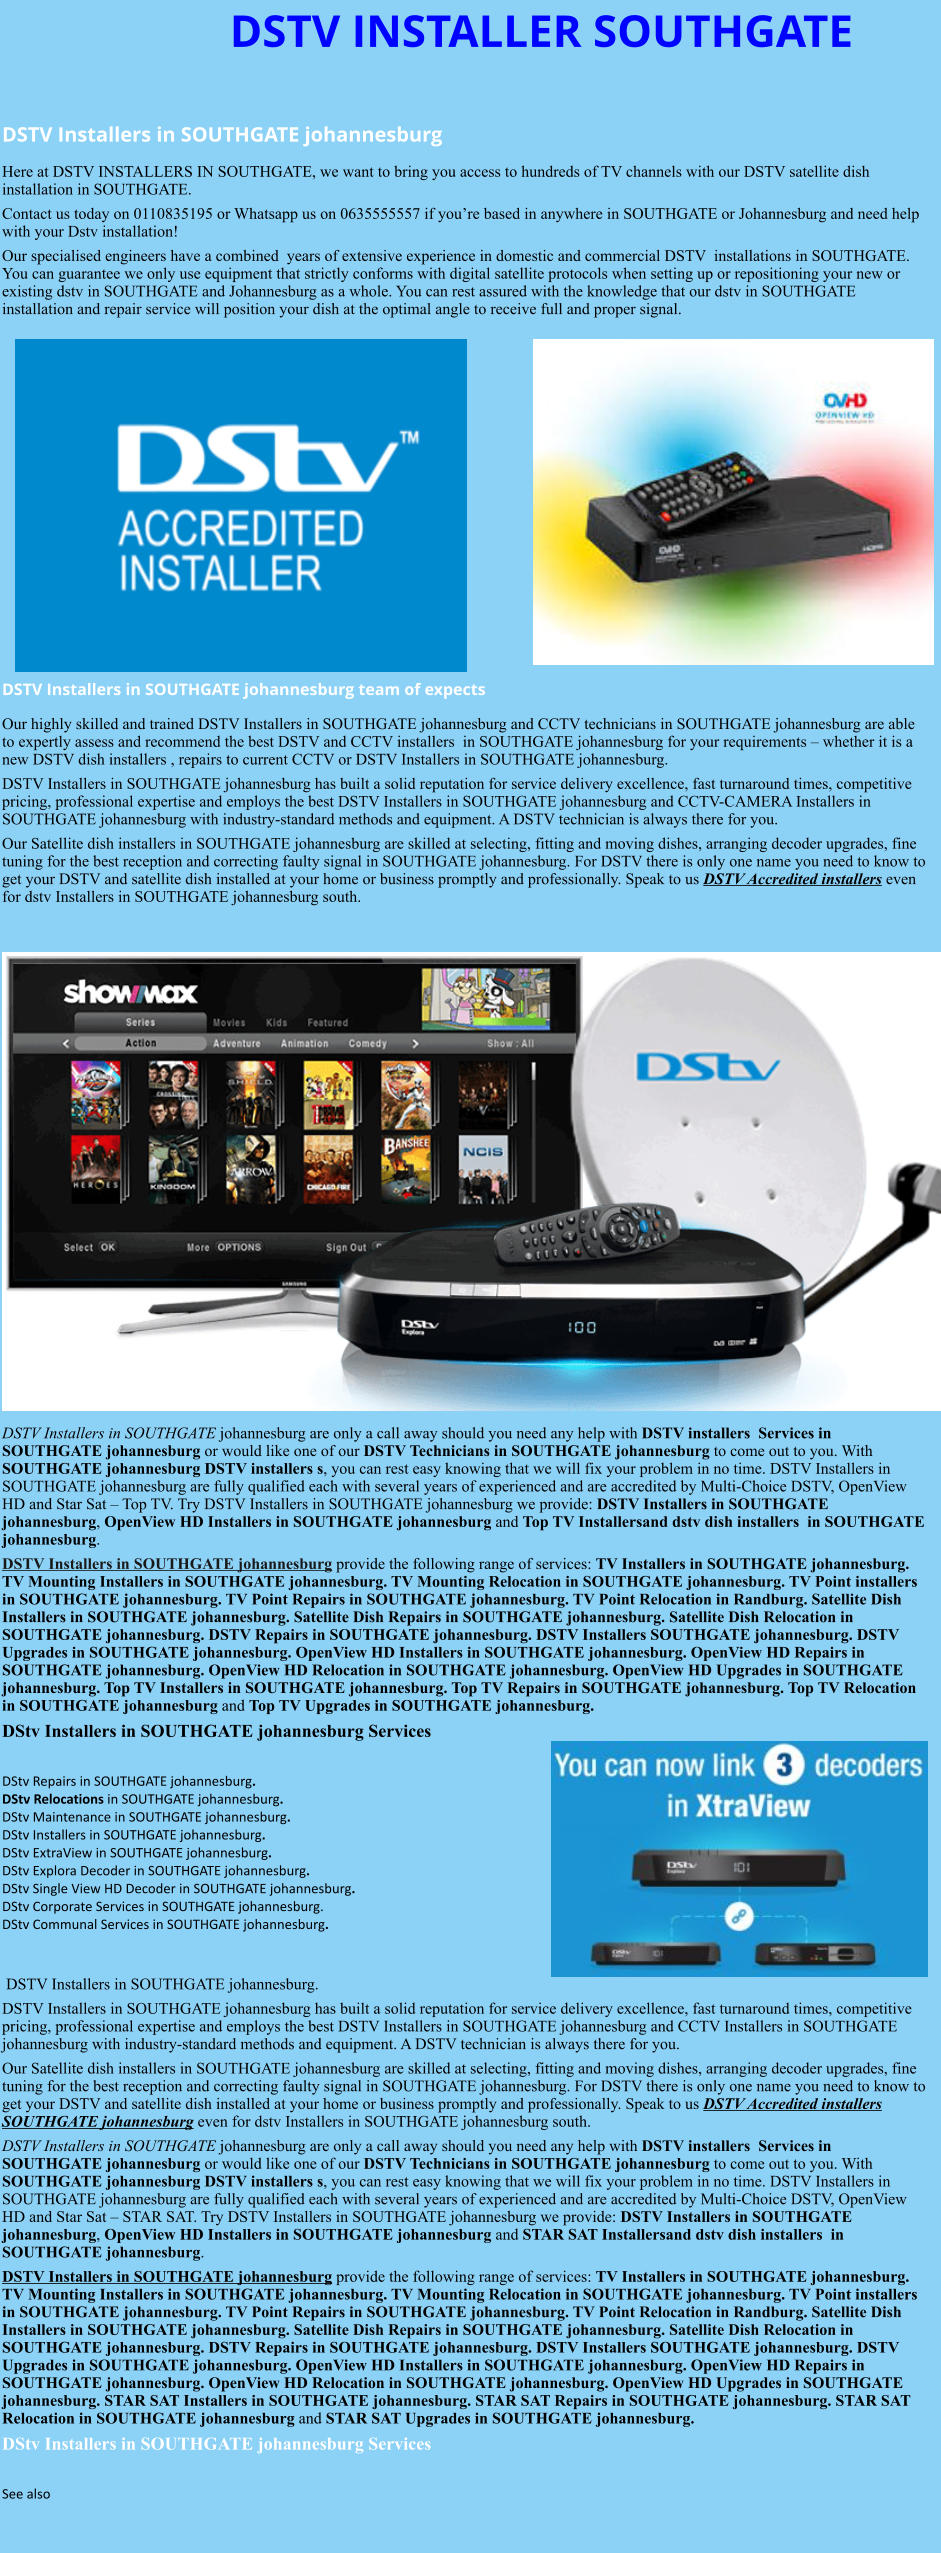 DSTV INSTALLER SOUTHGATE  DSTV Installers in SOUTHGATE johannesburg  Here at DSTV INSTALLERS IN SOUTHGATE, we want to bring you access to hundreds of TV channels with our DSTV satellite dish installation in SOUTHGATE. Contact us today on 0110835195 or Whatsapp us on 0635555557 if you’re based in anywhere in SOUTHGATE or Johannesburg and need help with your Dstv installation! Our specialised engineers have a combined  years of extensive experience in domestic and commercial DSTV  installations in SOUTHGATE. You can guarantee we only use equipment that strictly conforms with digital satellite protocols when setting up or repositioning your new or existing dstv in SOUTHGATE and Johannesburg as a whole. You can rest assured with the knowledge that our dstv in SOUTHGATE installation and repair service will position your dish at the optimal angle to receive full and proper signal.               DSTV Installers in SOUTHGATE johannesburg team of expects Our highly skilled and trained DSTV Installers in SOUTHGATE johannesburg and CCTV technicians in SOUTHGATE johannesburg are able to expertly assess and recommend the best DSTV and CCTV installers  in SOUTHGATE johannesburg for your requirements – whether it is a new DSTV dish installers , repairs to current CCTV or DSTV Installers in SOUTHGATE johannesburg. DSTV Installers in SOUTHGATE johannesburg has built a solid reputation for service delivery excellence, fast turnaround times, competitive pricing, professional expertise and employs the best DSTV Installers in SOUTHGATE johannesburg and CCTV-CAMERA Installers in SOUTHGATE johannesburg with industry-standard methods and equipment. A DSTV technician is always there for you. Our Satellite dish installers in SOUTHGATE johannesburg are skilled at selecting, fitting and moving dishes, arranging decoder upgrades, fine tuning for the best reception and correcting faulty signal in SOUTHGATE johannesburg. For DSTV there is only one name you need to know to get your DSTV and satellite dish installed at your home or business promptly and professionally. Speak to us DSTV Accredited installers even for dstv Installers in SOUTHGATE johannesburg south.                      DSTV Installers in SOUTHGATE johannesburg are only a call away should you need any help with DSTV installers  Services in SOUTHGATE johannesburg or would like one of our DSTV Technicians in SOUTHGATE johannesburg to come out to you. With SOUTHGATE johannesburg DSTV installers s, you can rest easy knowing that we will fix your problem in no time. DSTV Installers in SOUTHGATE johannesburg are fully qualified each with several years of experienced and are accredited by Multi-Choice DSTV, OpenView HD and Star Sat – Top TV. Try DSTV Installers in SOUTHGATE johannesburg we provide: DSTV Installers in SOUTHGATE johannesburg, OpenView HD Installers in SOUTHGATE johannesburg and Top TV Installersand dstv dish installers  in SOUTHGATE johannesburg. DSTV Installers in SOUTHGATE johannesburg provide the following range of services: TV Installers in SOUTHGATE johannesburg. TV Mounting Installers in SOUTHGATE johannesburg. TV Mounting Relocation in SOUTHGATE johannesburg. TV Point installers  in SOUTHGATE johannesburg. TV Point Repairs in SOUTHGATE johannesburg. TV Point Relocation in Randburg. Satellite Dish Installers in SOUTHGATE johannesburg. Satellite Dish Repairs in SOUTHGATE johannesburg. Satellite Dish Relocation in SOUTHGATE johannesburg. DSTV Repairs in SOUTHGATE johannesburg. DSTV Installers SOUTHGATE johannesburg. DSTV Upgrades in SOUTHGATE johannesburg. OpenView HD Installers in SOUTHGATE johannesburg. OpenView HD Repairs in SOUTHGATE johannesburg. OpenView HD Relocation in SOUTHGATE johannesburg. OpenView HD Upgrades in SOUTHGATE johannesburg. Top TV Installers in SOUTHGATE johannesburg. Top TV Repairs in SOUTHGATE johannesburg. Top TV Relocation in SOUTHGATE johannesburg and Top TV Upgrades in SOUTHGATE johannesburg. DStv Installers in SOUTHGATE johannesburg Services  DStv Repairs in SOUTHGATE johannesburg.  DStv Relocations in SOUTHGATE johannesburg.  DStv Maintenance in SOUTHGATE johannesburg. DStv Installers in SOUTHGATE johannesburg. DStv ExtraView in SOUTHGATE johannesburg. DStv Explora Decoder in SOUTHGATE johannesburg. DStv Single View HD Decoder in SOUTHGATE johannesburg. DStv Corporate Services in SOUTHGATE johannesburg. DStv Communal Services in SOUTHGATE johannesburg.    DSTV Installers in SOUTHGATE johannesburg. DSTV Installers in SOUTHGATE johannesburg has built a solid reputation for service delivery excellence, fast turnaround times, competitive pricing, professional expertise and employs the best DSTV Installers in SOUTHGATE johannesburg and CCTV Installers in SOUTHGATE johannesburg with industry-standard methods and equipment. A DSTV technician is always there for you. Our Satellite dish installers in SOUTHGATE johannesburg are skilled at selecting, fitting and moving dishes, arranging decoder upgrades, fine tuning for the best reception and correcting faulty signal in SOUTHGATE johannesburg. For DSTV there is only one name you need to know to get your DSTV and satellite dish installed at your home or business promptly and professionally. Speak to us DSTV Accredited installers SOUTHGATE johannesburg even for dstv Installers in SOUTHGATE johannesburg south. DSTV Installers in SOUTHGATE johannesburg are only a call away should you need any help with DSTV installers  Services in SOUTHGATE johannesburg or would like one of our DSTV Technicians in SOUTHGATE johannesburg to come out to you. With SOUTHGATE johannesburg DSTV installers s, you can rest easy knowing that we will fix your problem in no time. DSTV Installers in SOUTHGATE johannesburg are fully qualified each with several years of experienced and are accredited by Multi-Choice DSTV, OpenView HD and Star Sat – STAR SAT. Try DSTV Installers in SOUTHGATE johannesburg we provide: DSTV Installers in SOUTHGATE johannesburg, OpenView HD Installers in SOUTHGATE johannesburg and STAR SAT Installersand dstv dish installers  in SOUTHGATE johannesburg. DSTV Installers in SOUTHGATE johannesburg provide the following range of services: TV Installers in SOUTHGATE johannesburg. TV Mounting Installers in SOUTHGATE johannesburg. TV Mounting Relocation in SOUTHGATE johannesburg. TV Point installers  in SOUTHGATE johannesburg. TV Point Repairs in SOUTHGATE johannesburg. TV Point Relocation in Randburg. Satellite Dish Installers in SOUTHGATE johannesburg. Satellite Dish Repairs in SOUTHGATE johannesburg. Satellite Dish Relocation in SOUTHGATE johannesburg. DSTV Repairs in SOUTHGATE johannesburg. DSTV Installers SOUTHGATE johannesburg. DSTV Upgrades in SOUTHGATE johannesburg. OpenView HD Installers in SOUTHGATE johannesburg. OpenView HD Repairs in SOUTHGATE johannesburg. OpenView HD Relocation in SOUTHGATE johannesburg. OpenView HD Upgrades in SOUTHGATE johannesburg. STAR SAT Installers in SOUTHGATE johannesburg. STAR SAT Repairs in SOUTHGATE johannesburg. STAR SAT Relocation in SOUTHGATE johannesburg and STAR SAT Upgrades in SOUTHGATE johannesburg. DStv Installers in SOUTHGATE johannesburg Services  See also